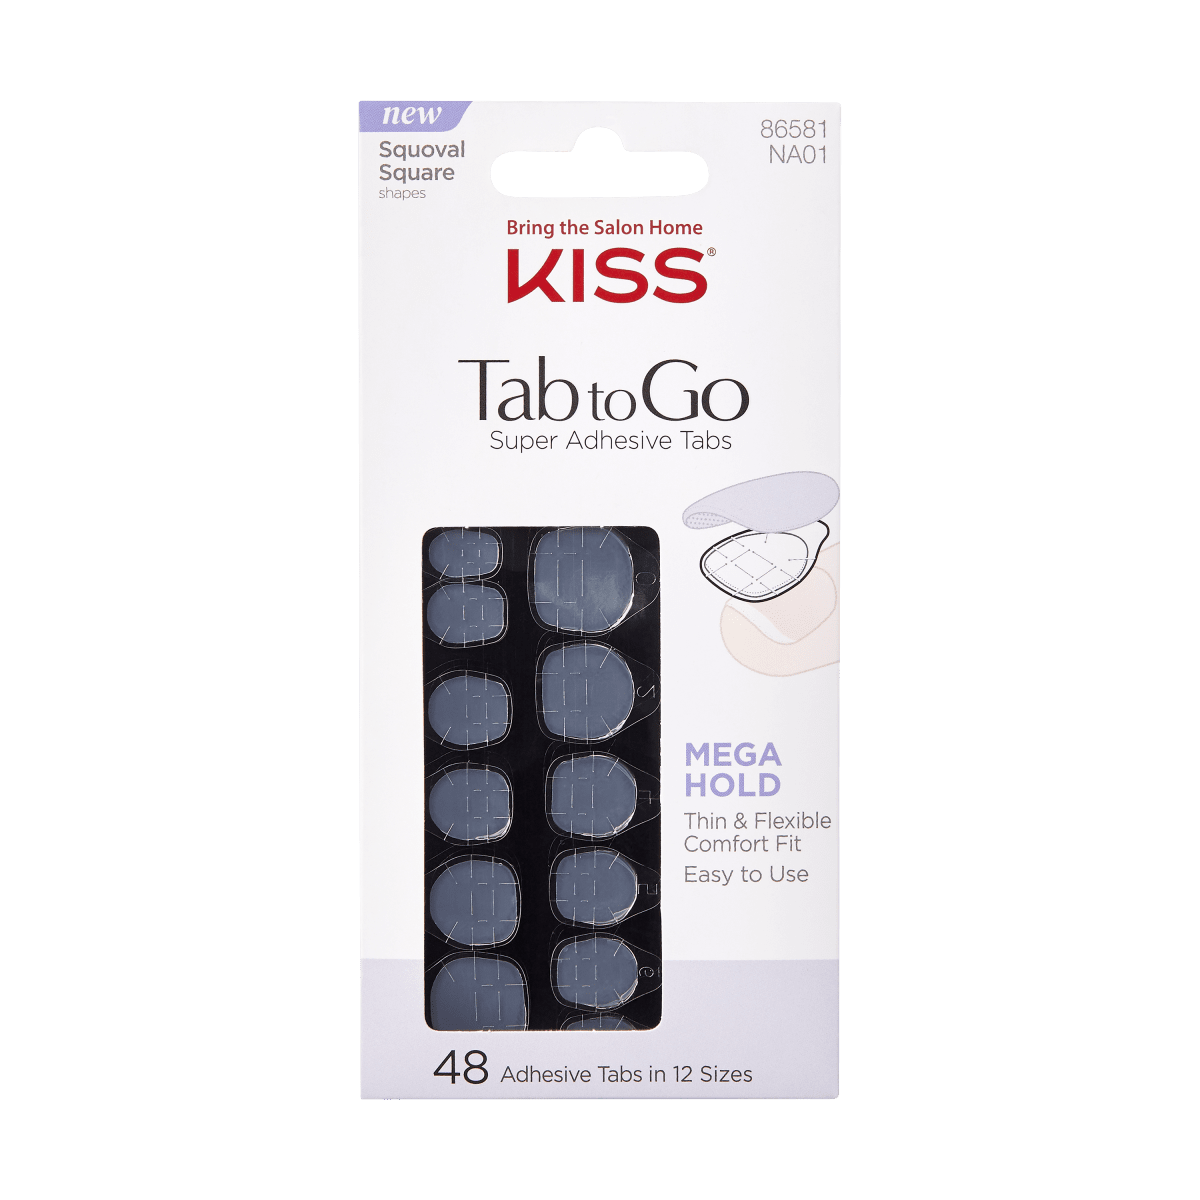 KISS Tab To Go Super Adhesive Tabs - U Asked For It